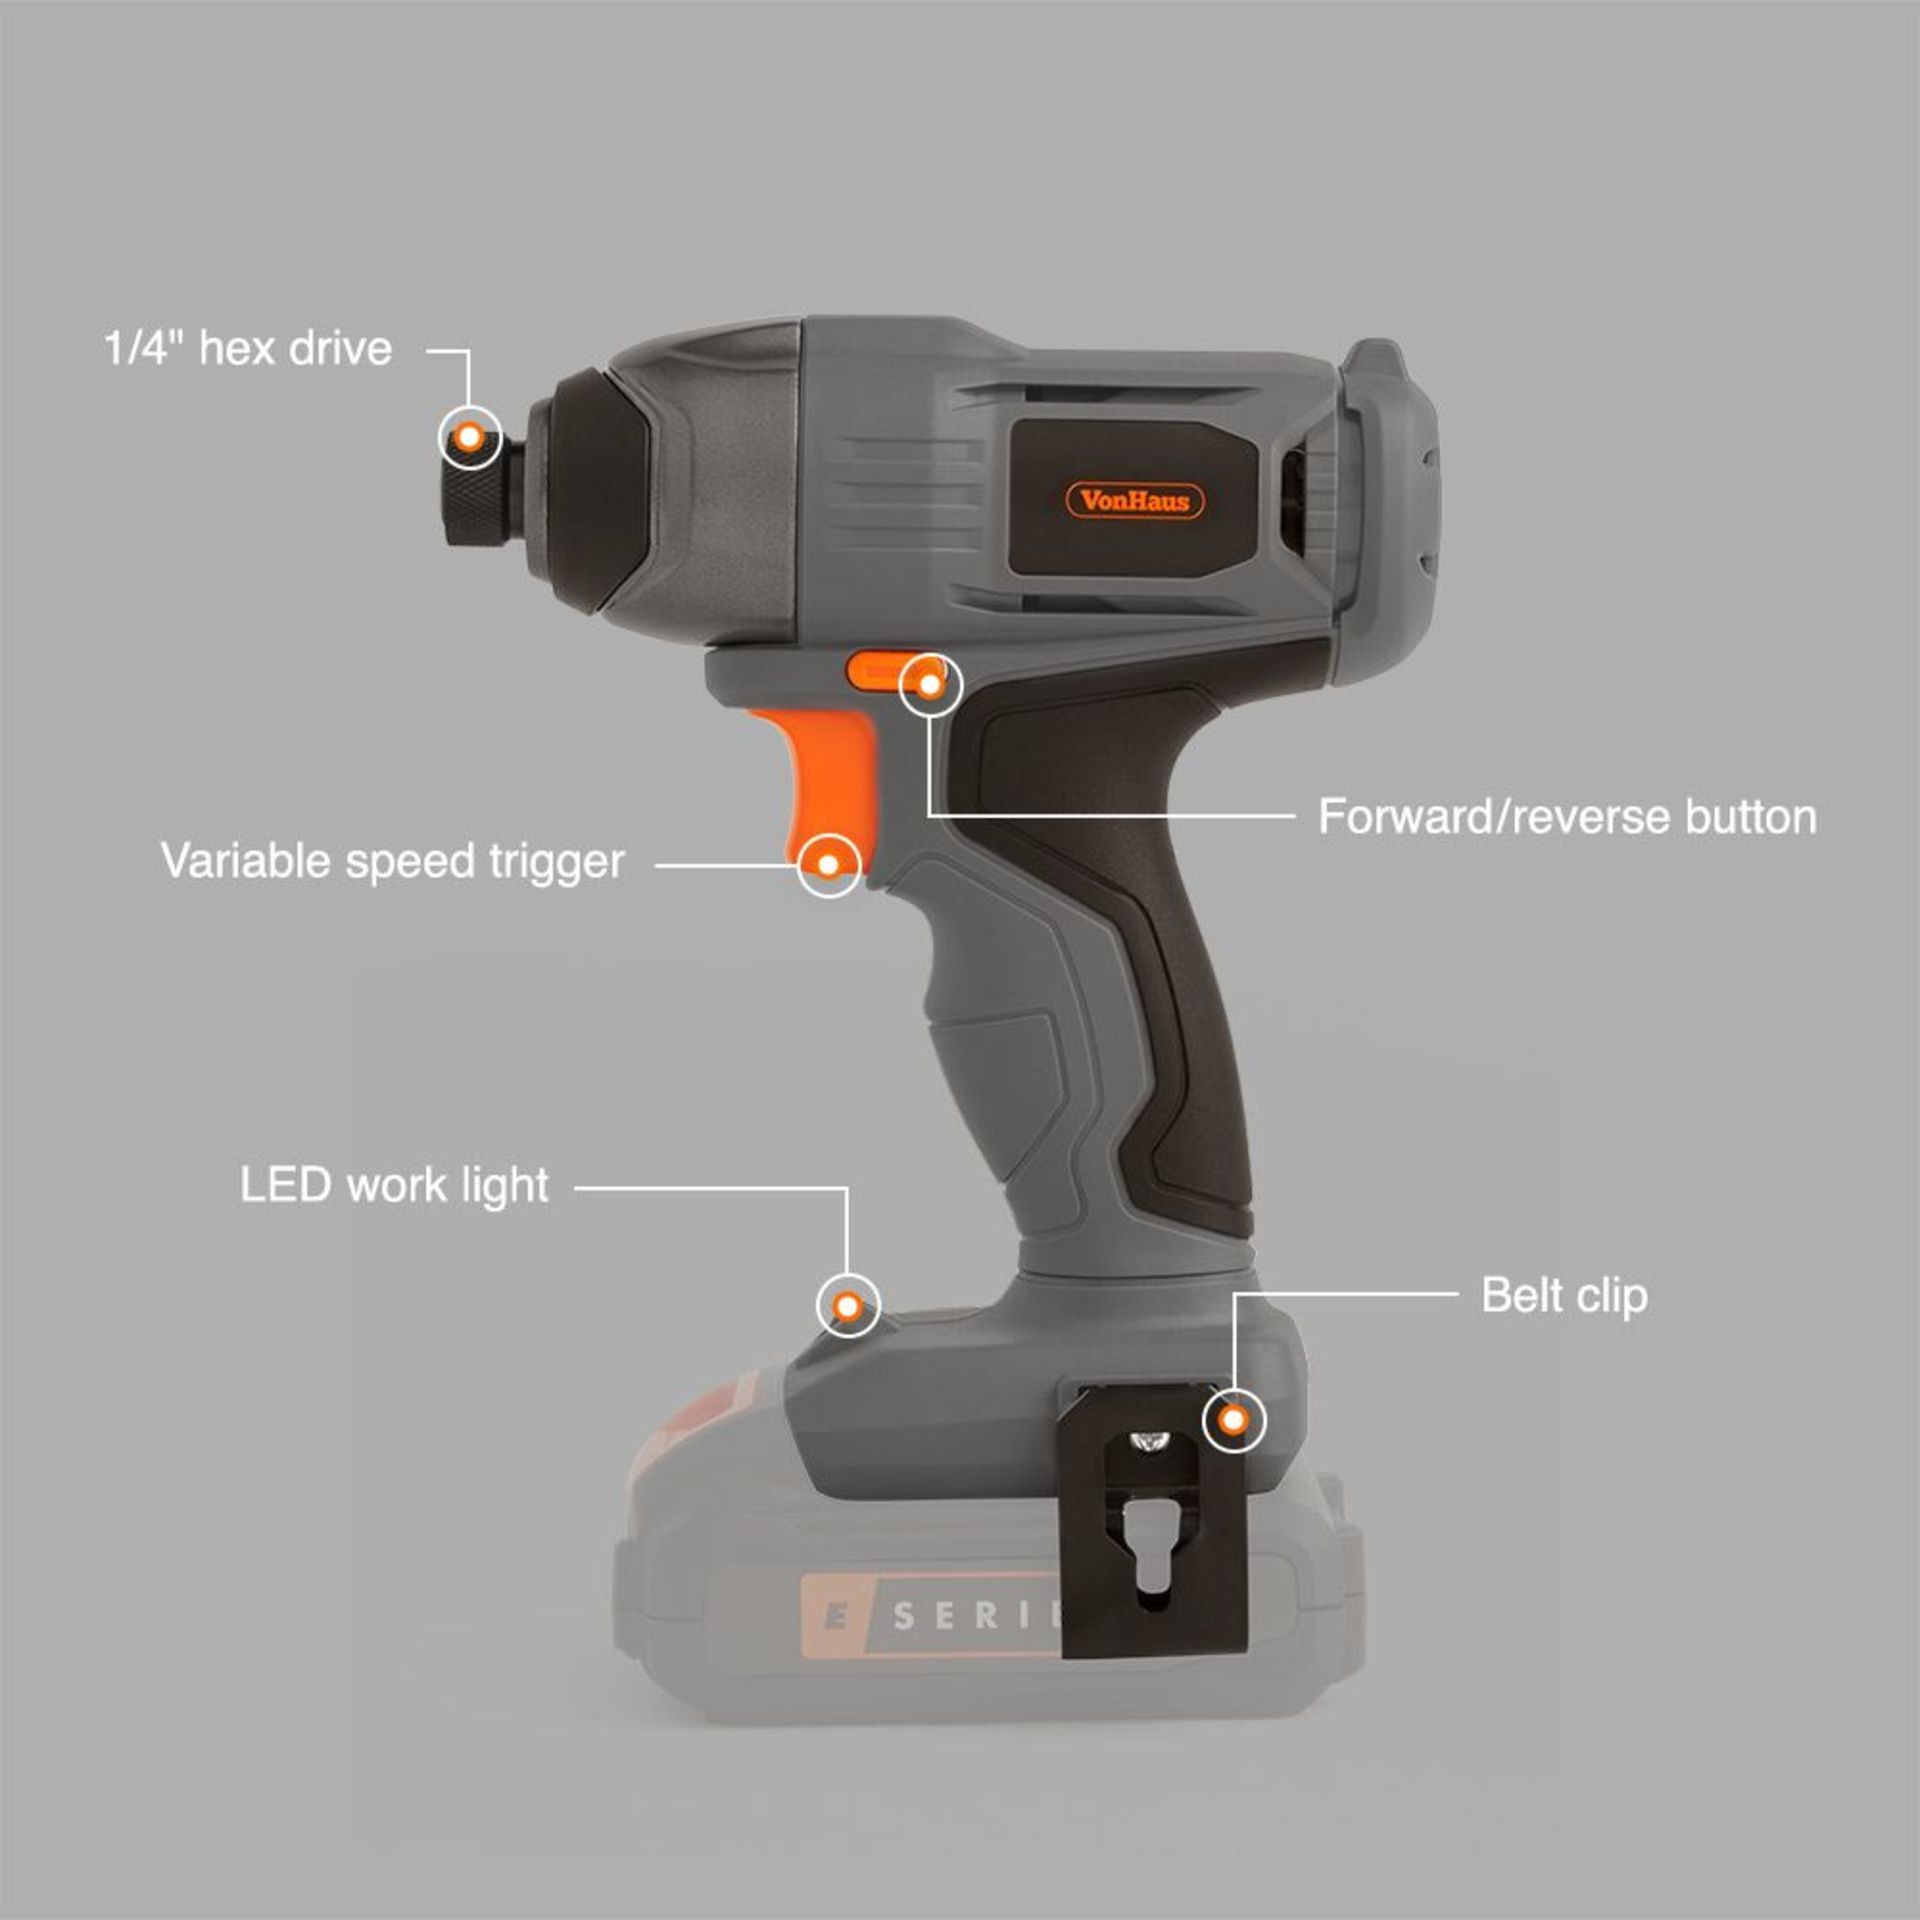 (K19) E-Series 18V Cordless Impact Drill Driver Cordless tool delivers a rotational force fo... - Image 2 of 2